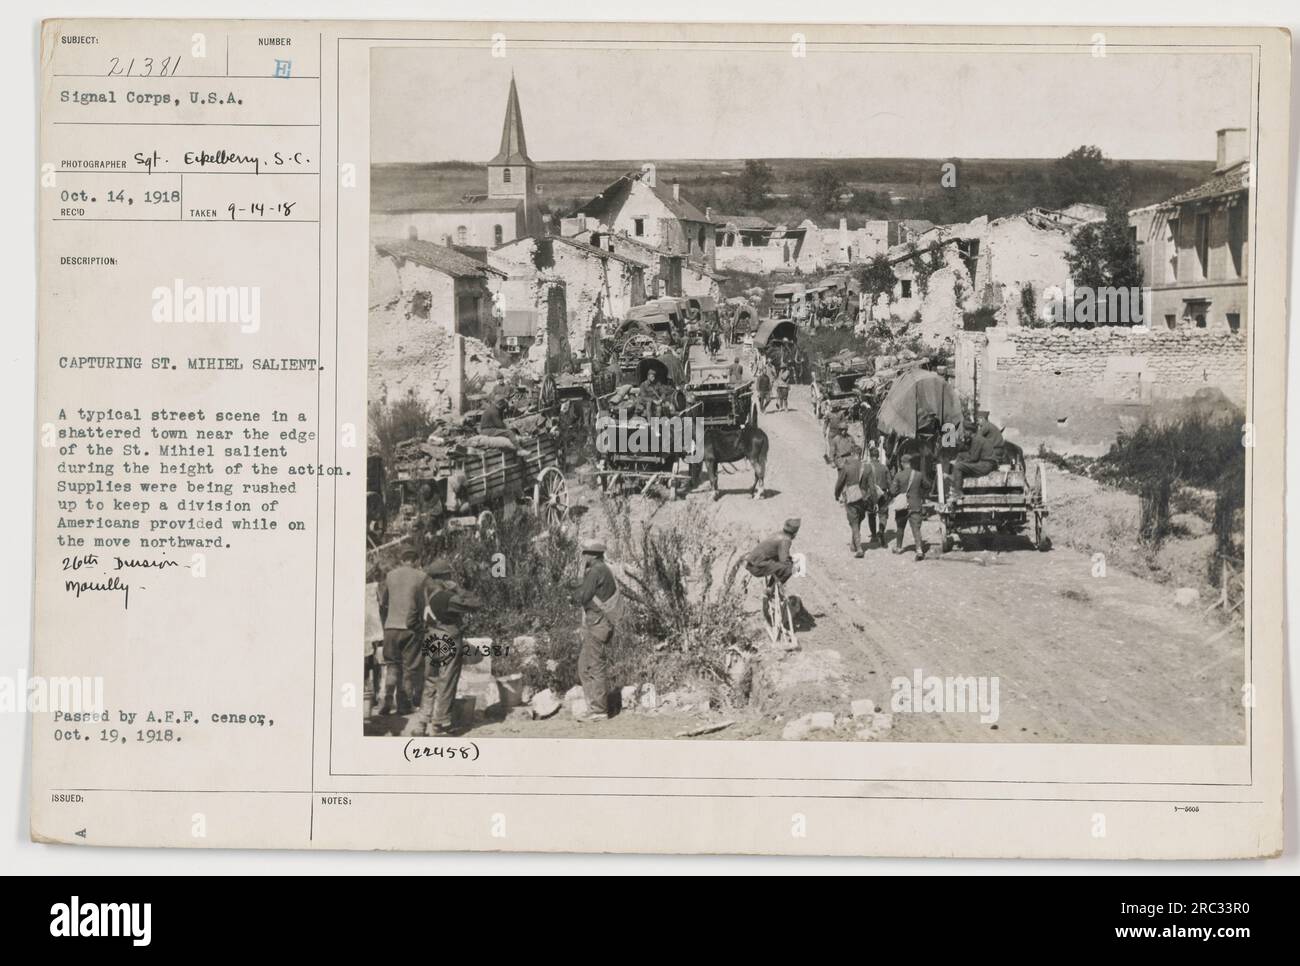 A typical street scene in a town near the St. Mihiel salient during the height of the action. Supplies being rushed to keep Americans provided while moving north. 26th Division. Mol. Stock Photo